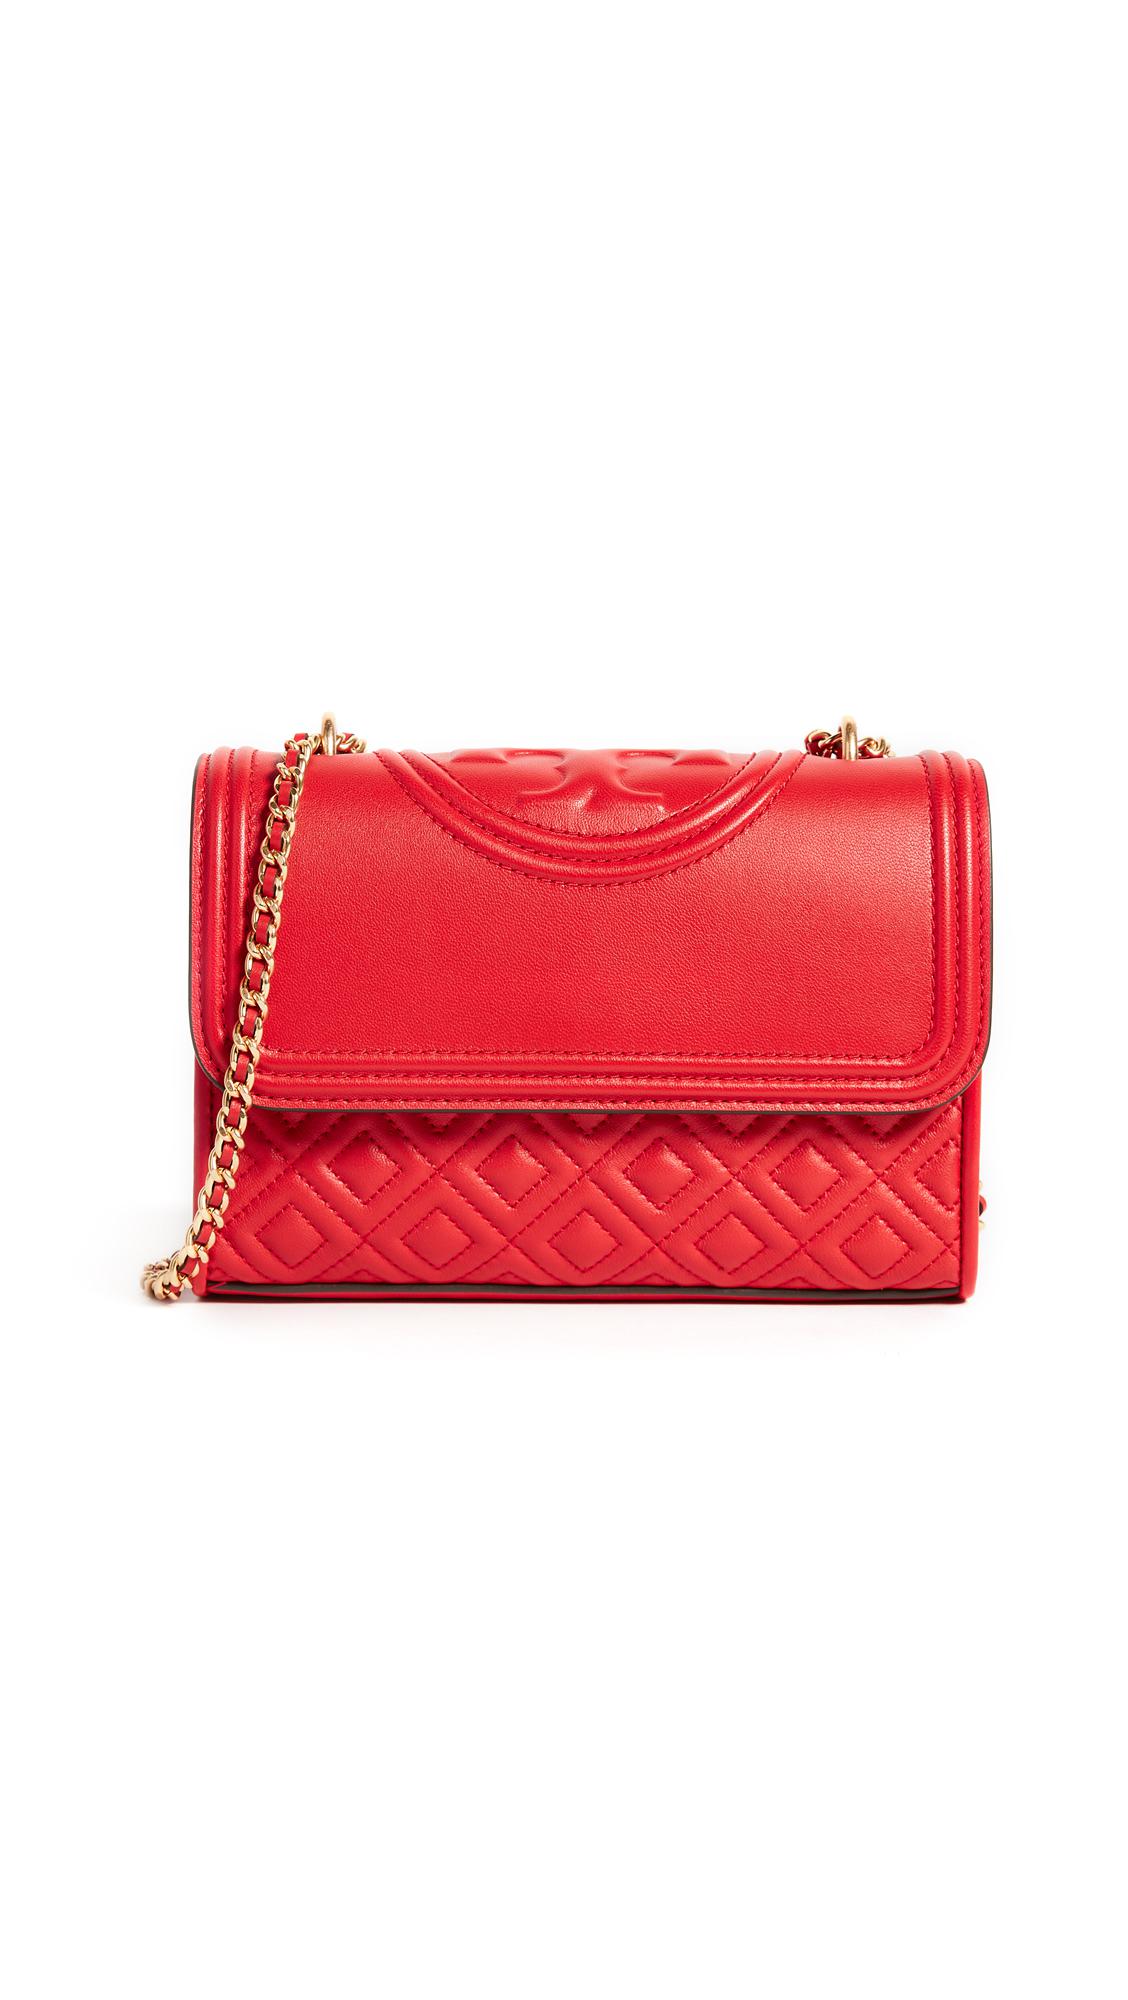 Tory Burch Fleming Small Convertible Shoulder Bag in Red | Lyst